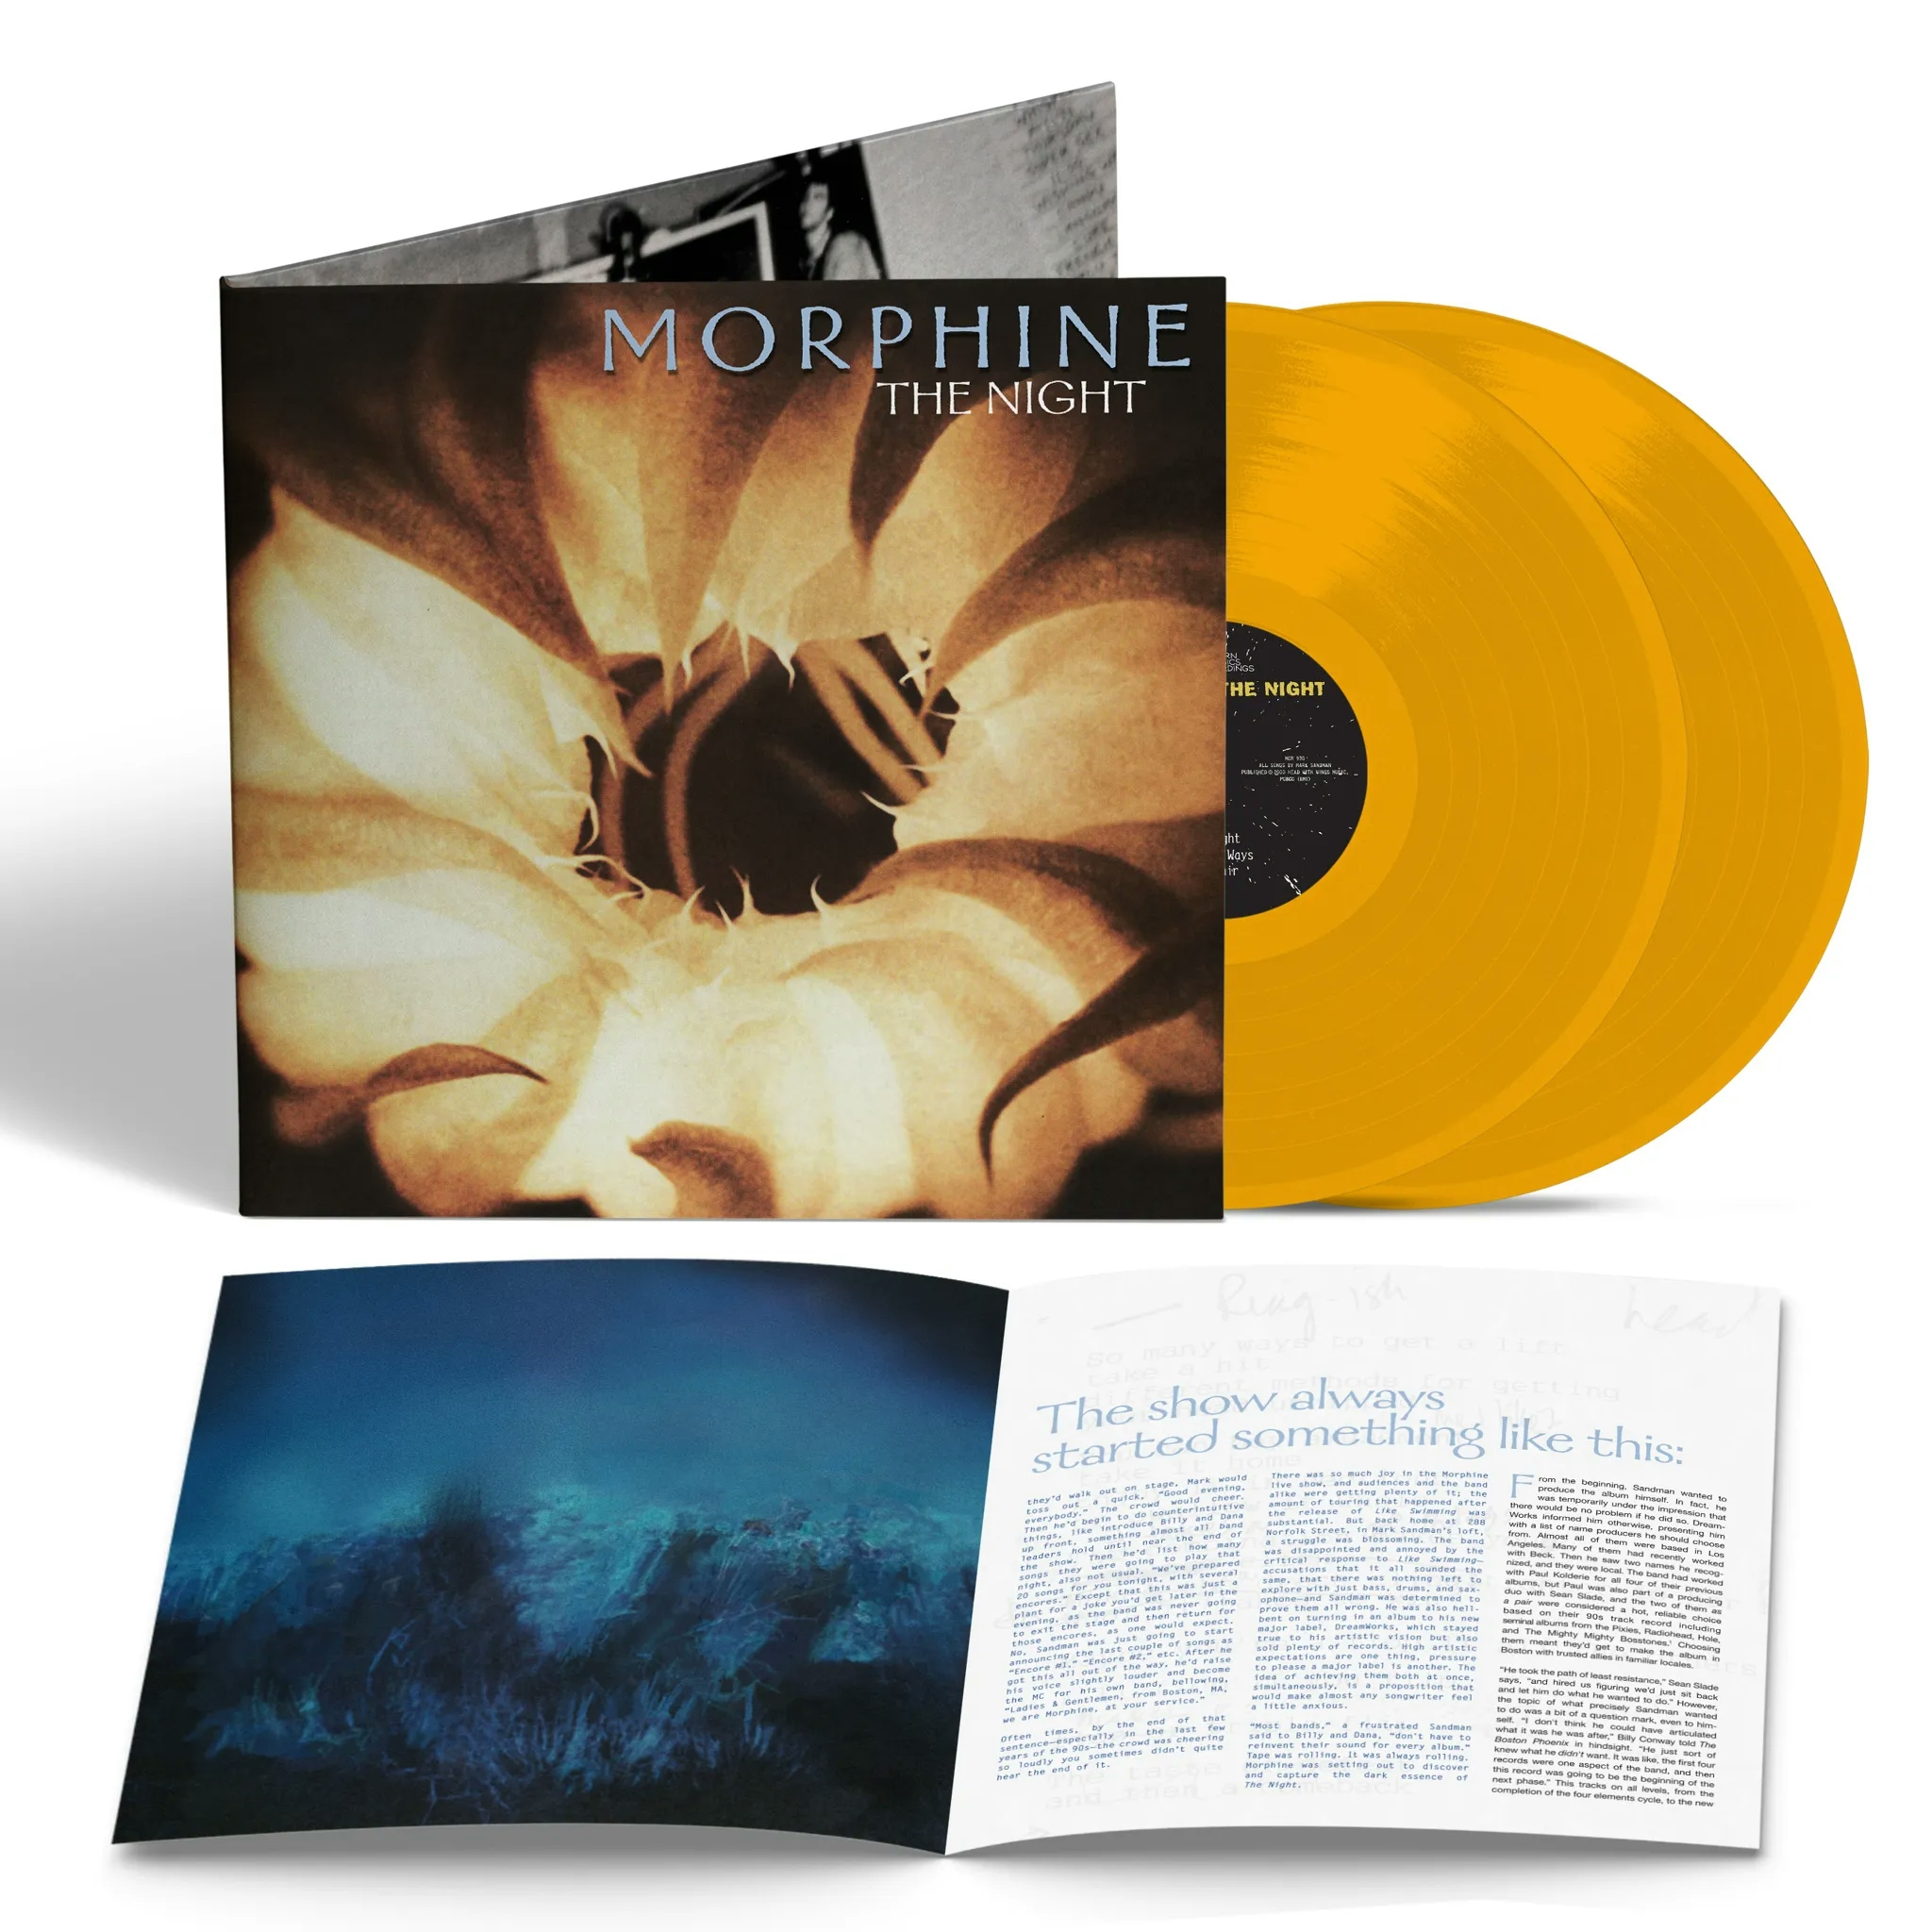 Album artwork for The Night by Morphine